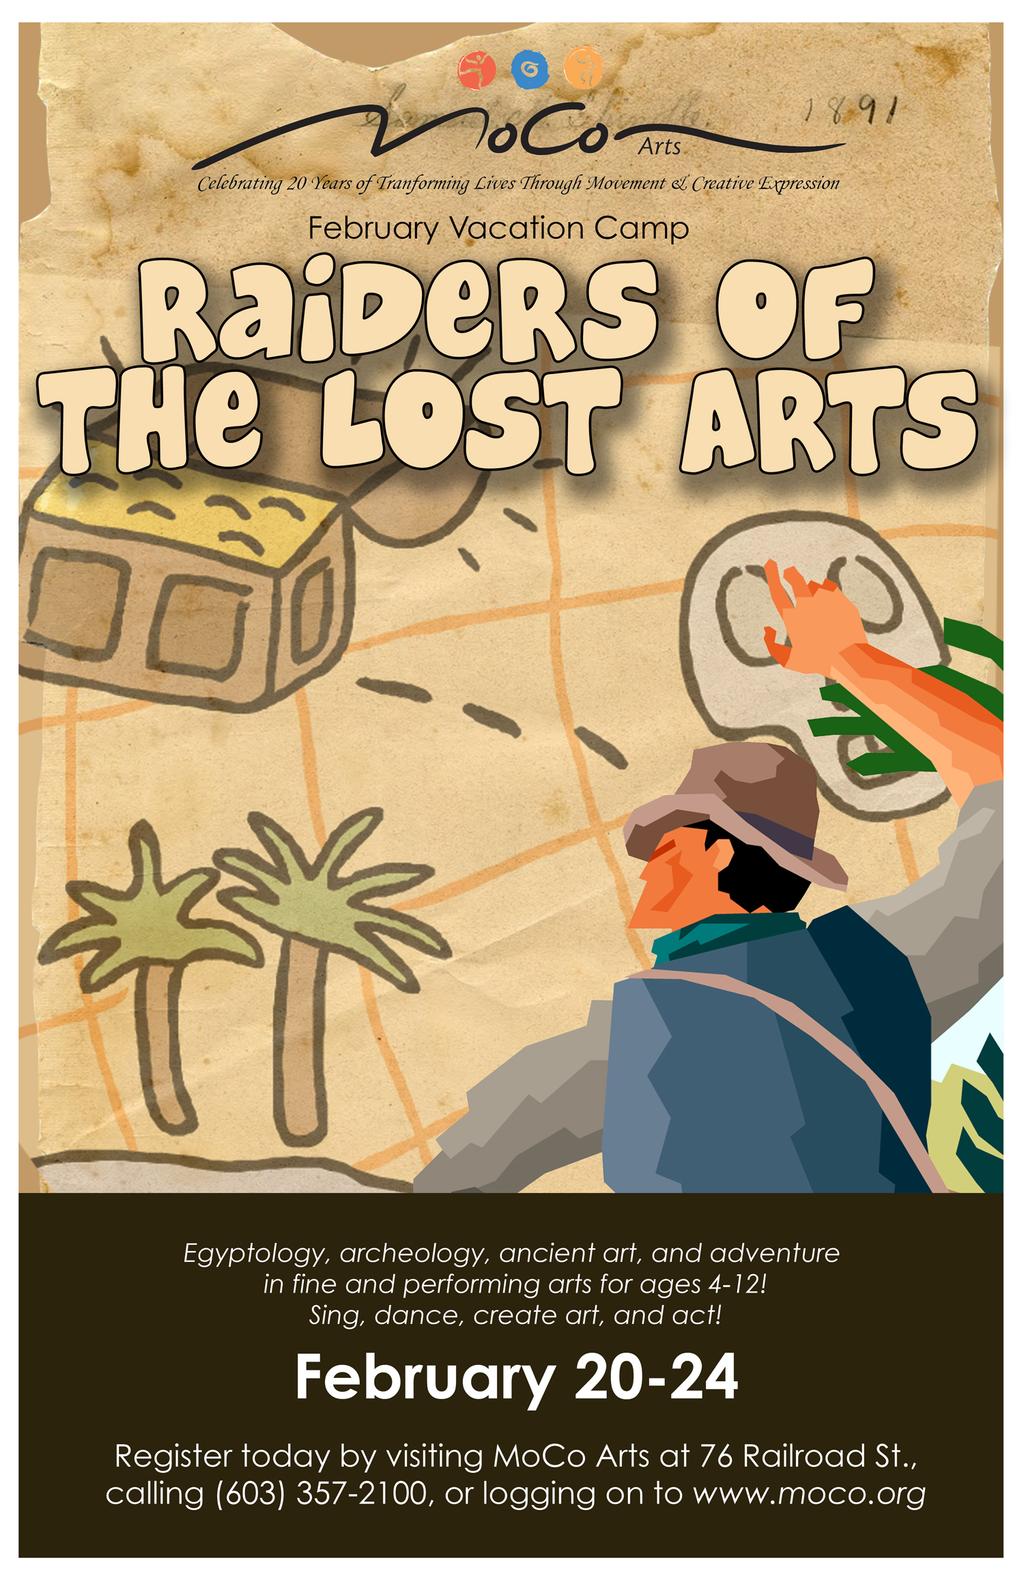 Raiders of the Lost Arts Info Packet Doctor Jones! We need YOUR help to recover the lost artifact from the tomb of King Tut.